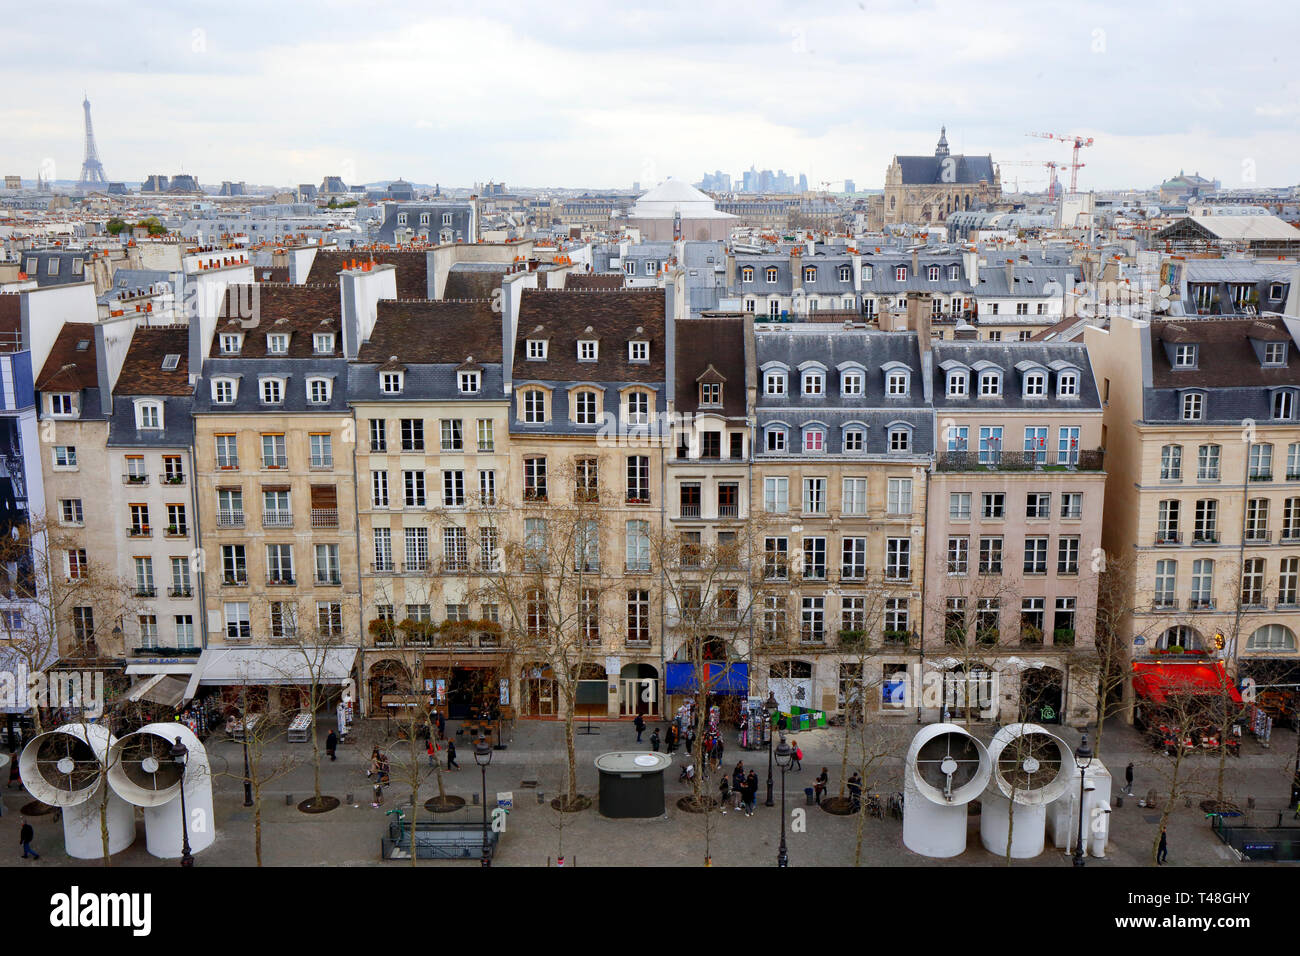 An aerial view of Paris from the Centre Pompidou art museum, Paris, France with Rue Saint-Martin in the foreground. Stock Photo